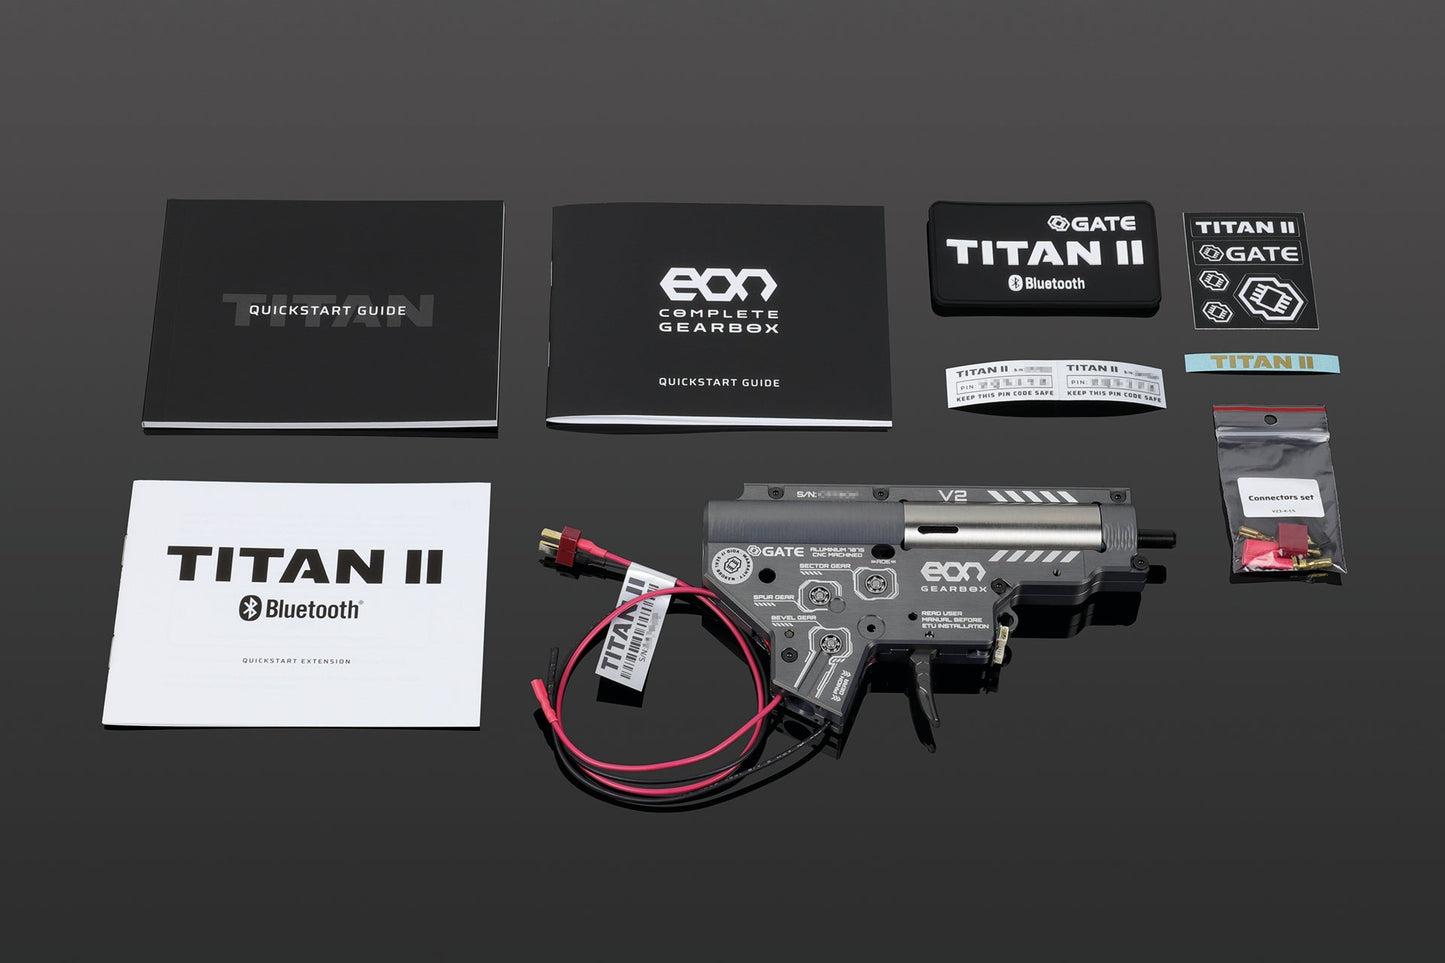 EON Complete V2 Gearbox 1.8 J with TITAN II Bluetooth®